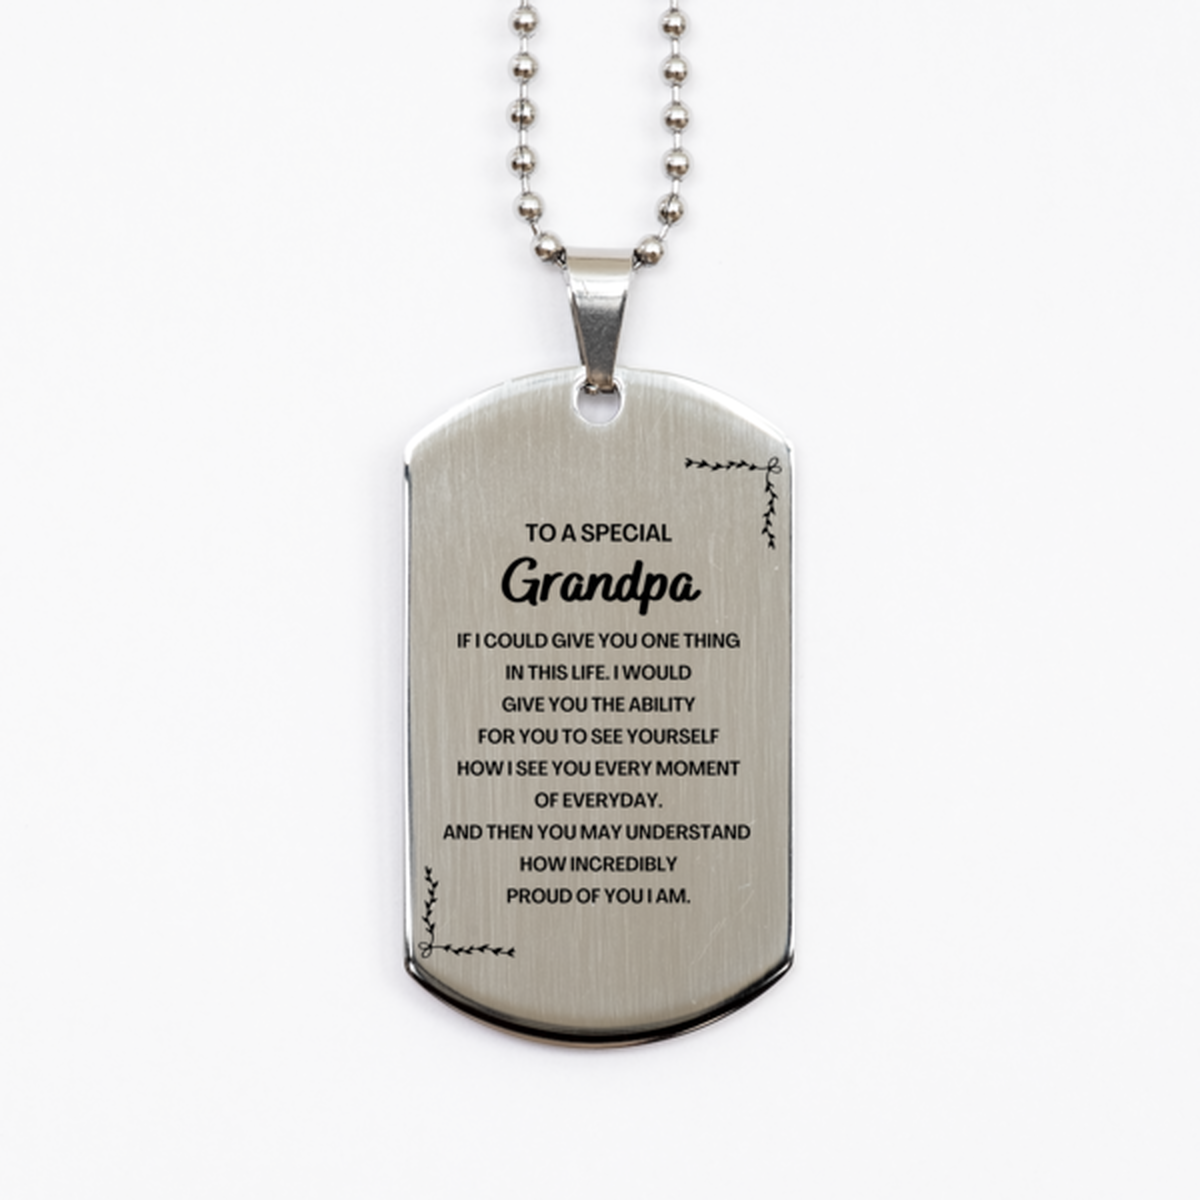 To My Grandpa Silver Dog Tag, Gifts For Grandpa Engraved, Inspirational Gifts for Christmas Birthday, Epic Gifts for Grandpa To A Special Grandpa how incredibly proud of you I am